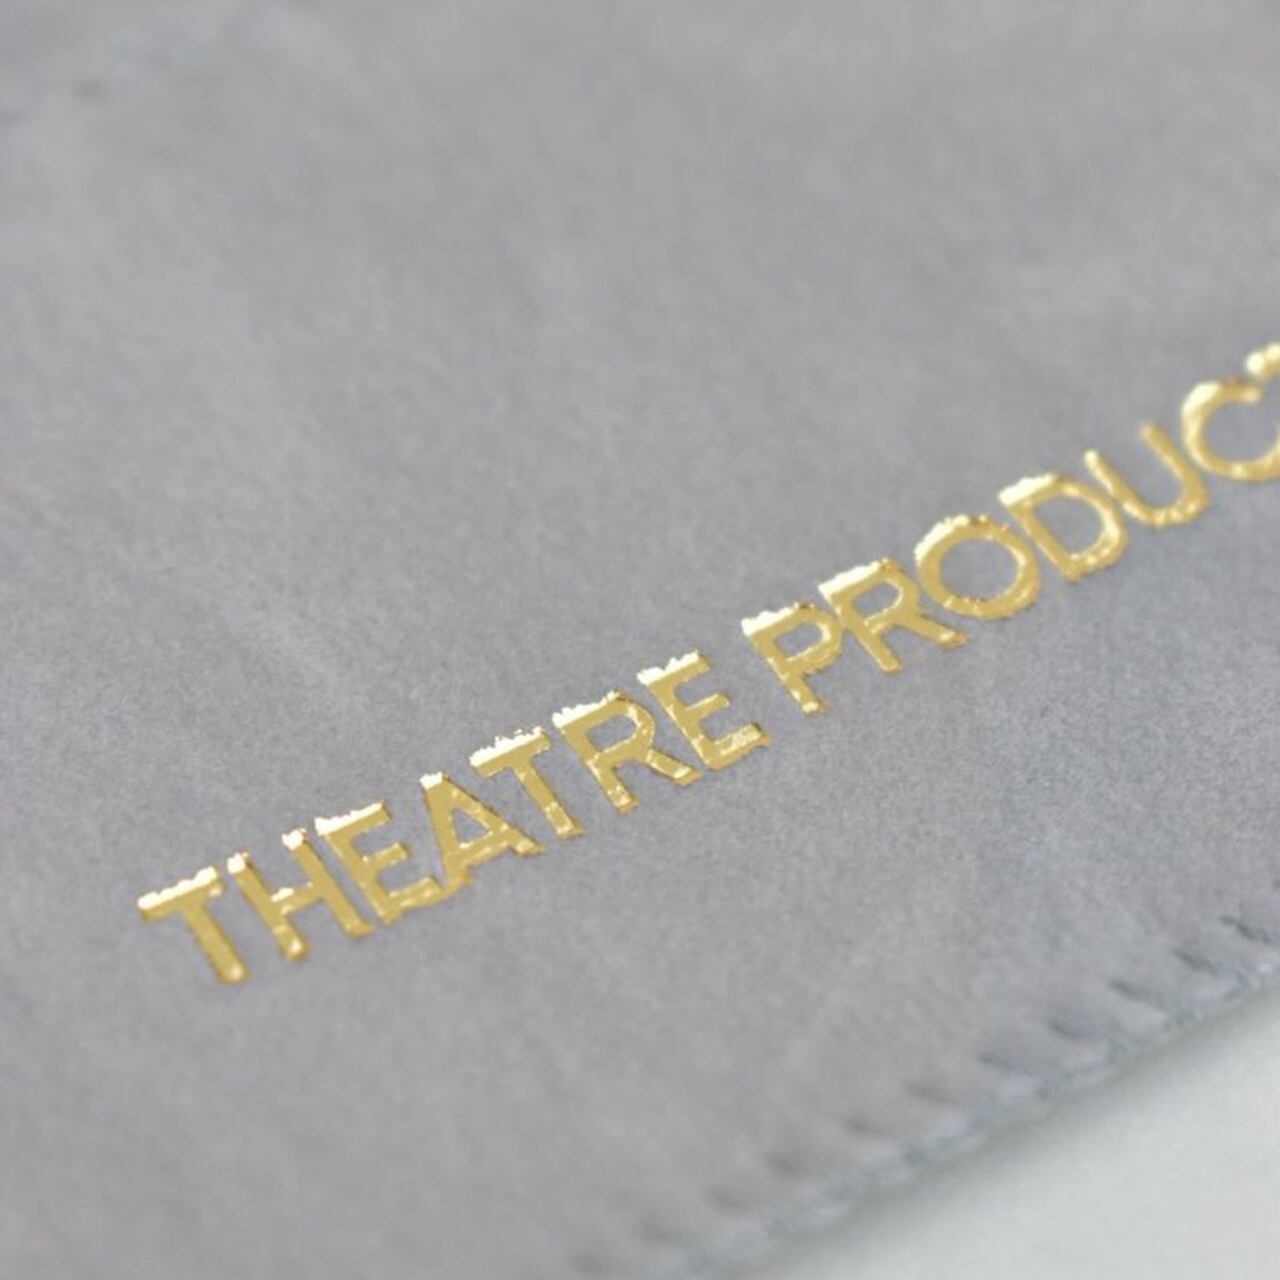 【THEATRE PRODUCTS】METALSLICEHEART RUBBERNECKLACE